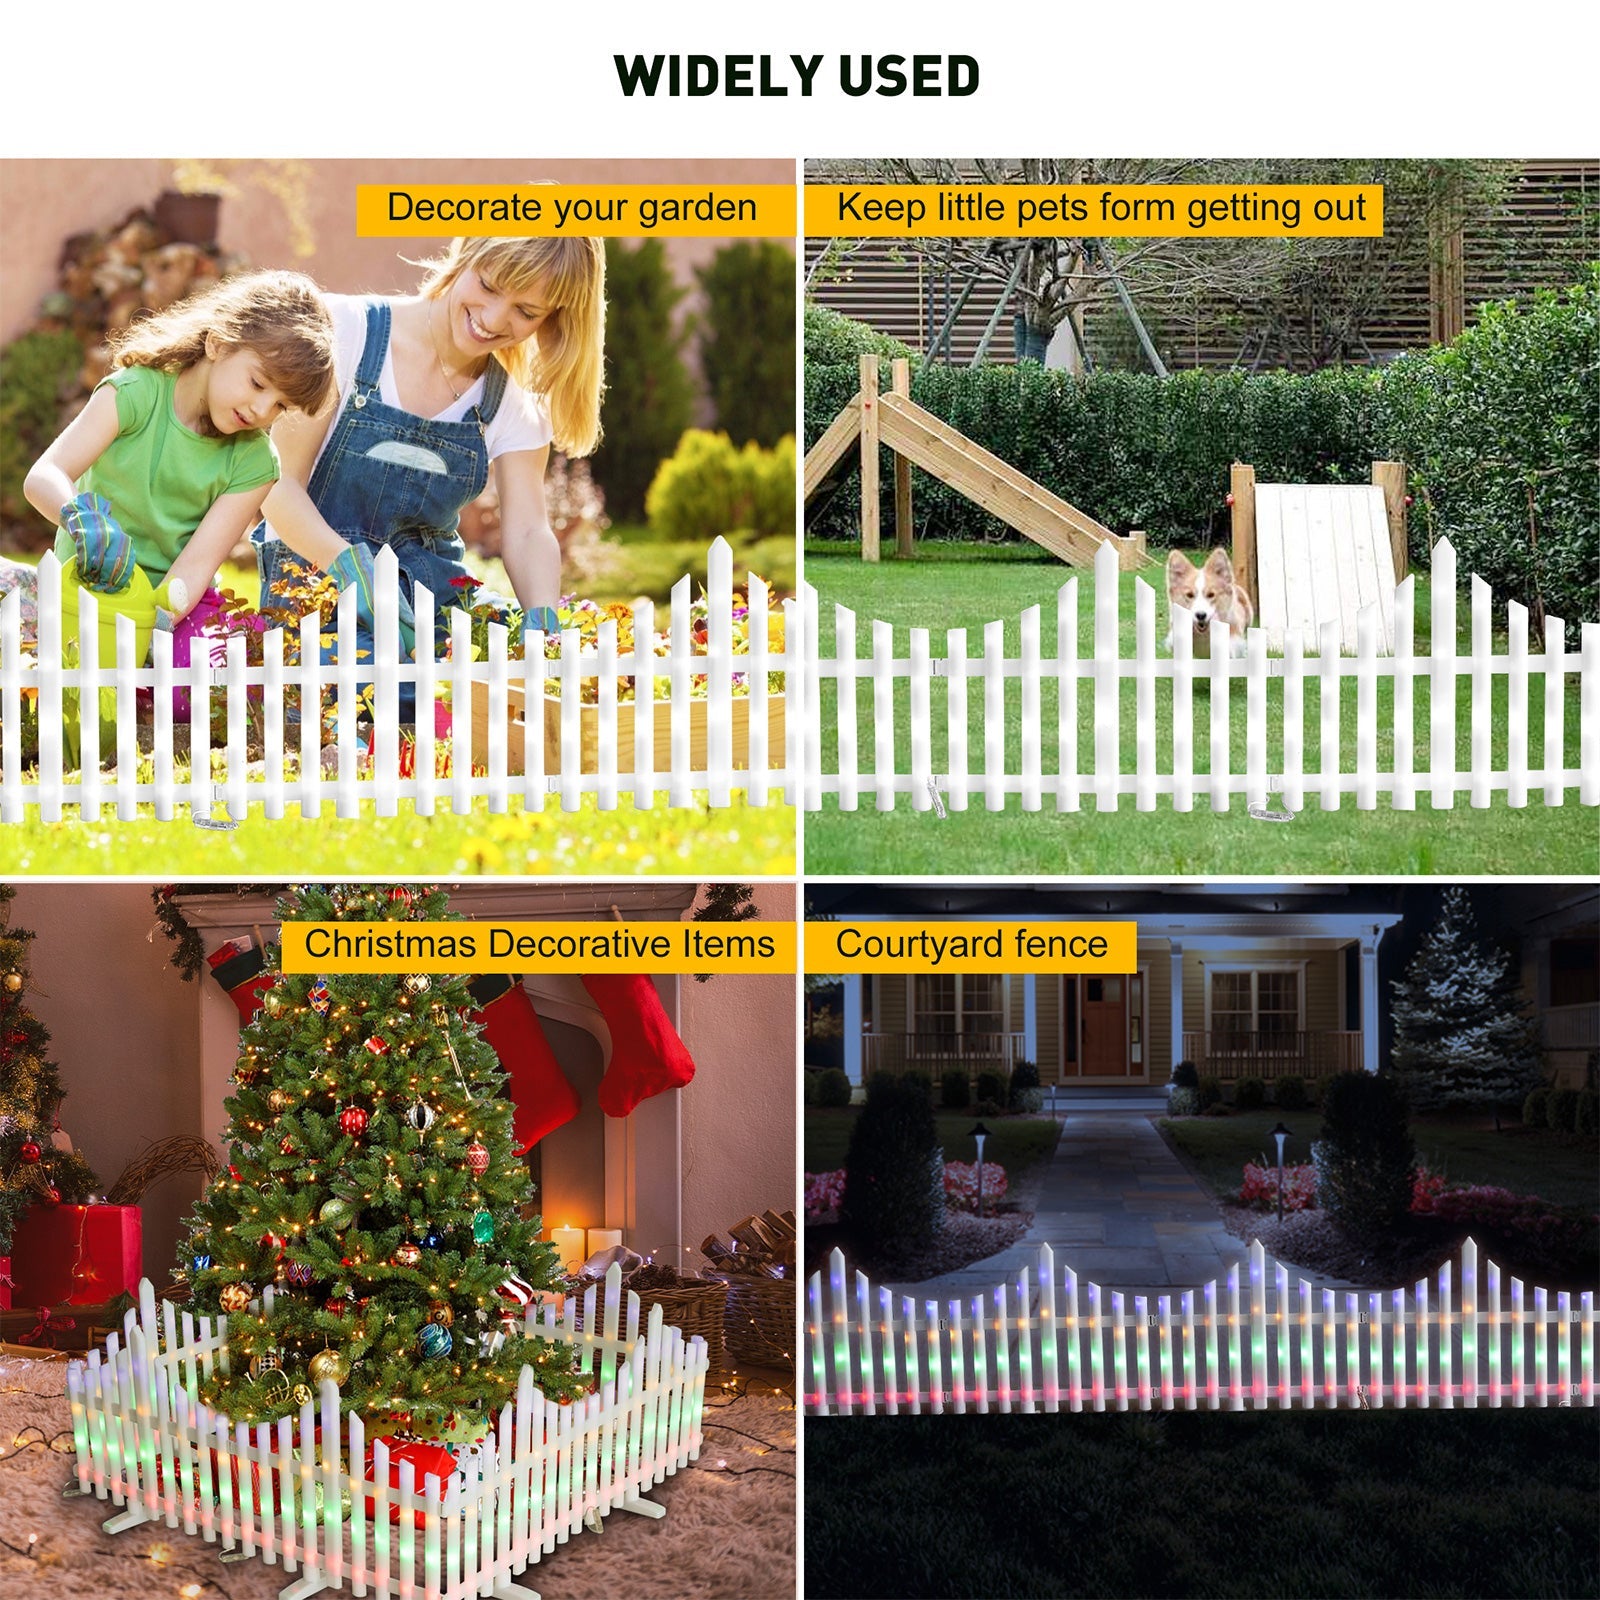 8 Pieces Garden Fence Lights Christmas Tree Fence Lights with 4 Color 8 Lighting Modes